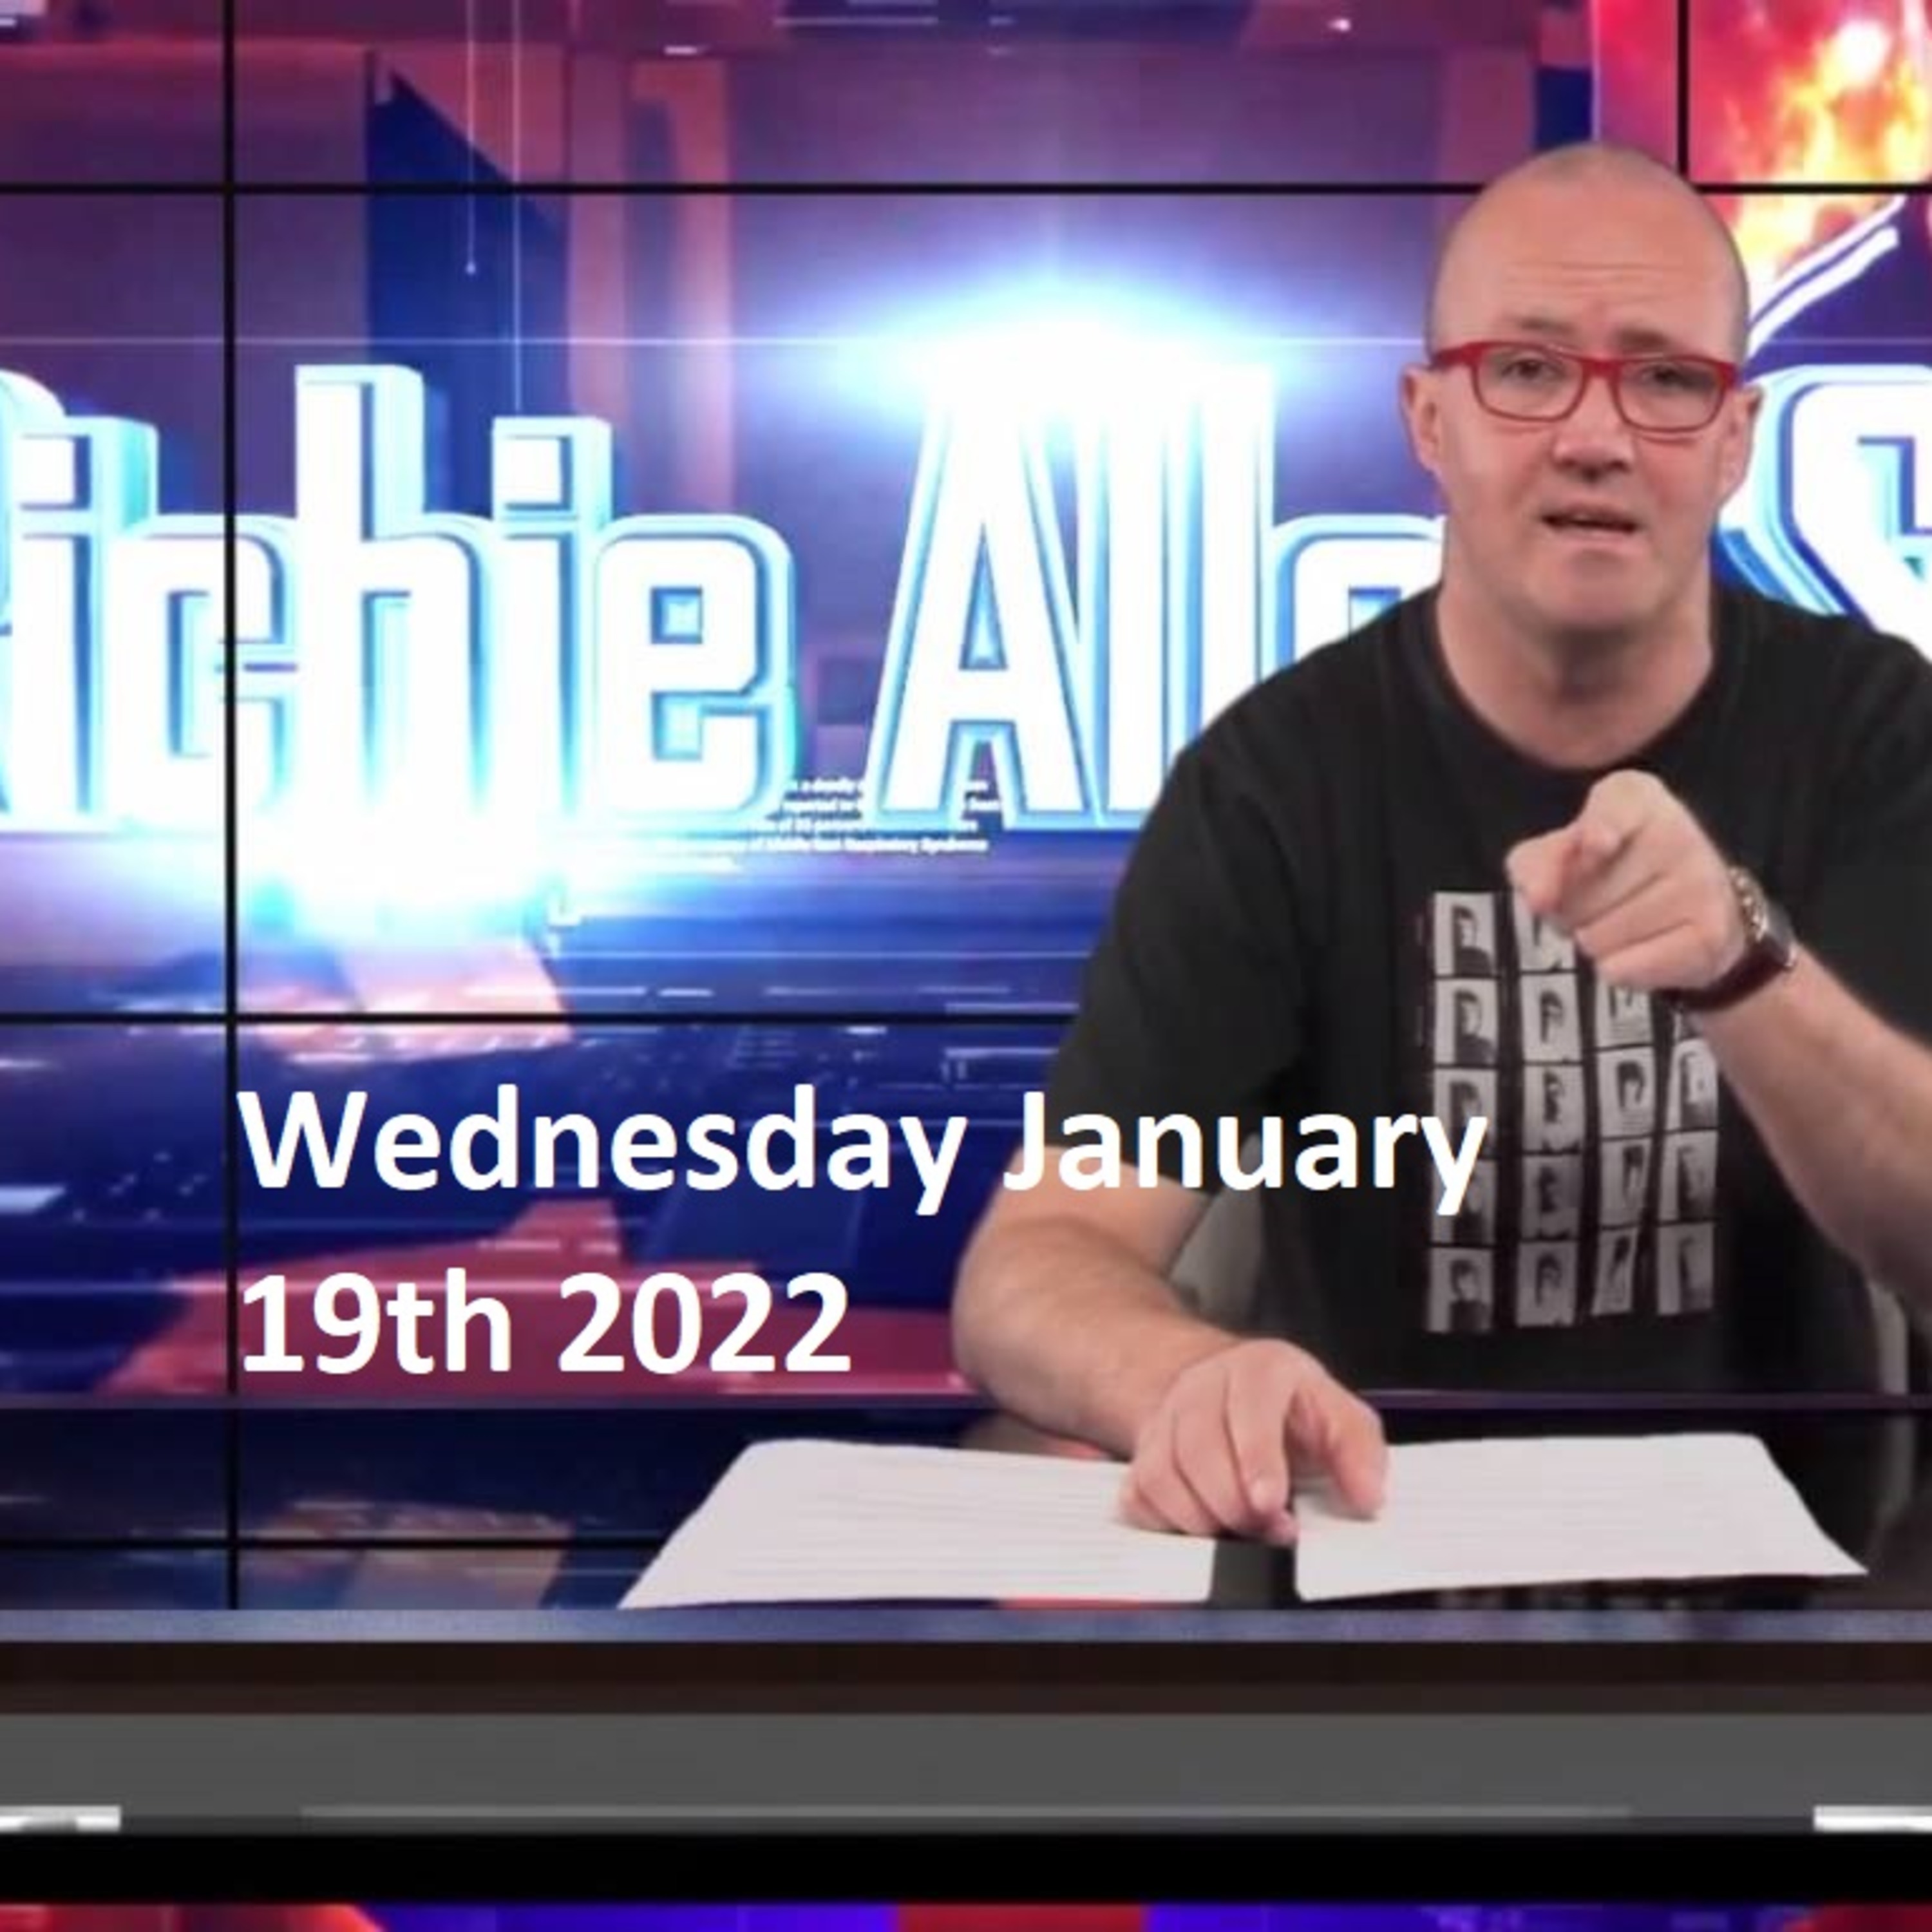 Episode 1392: The Richie Allen Show Wednesday January 19th 2022